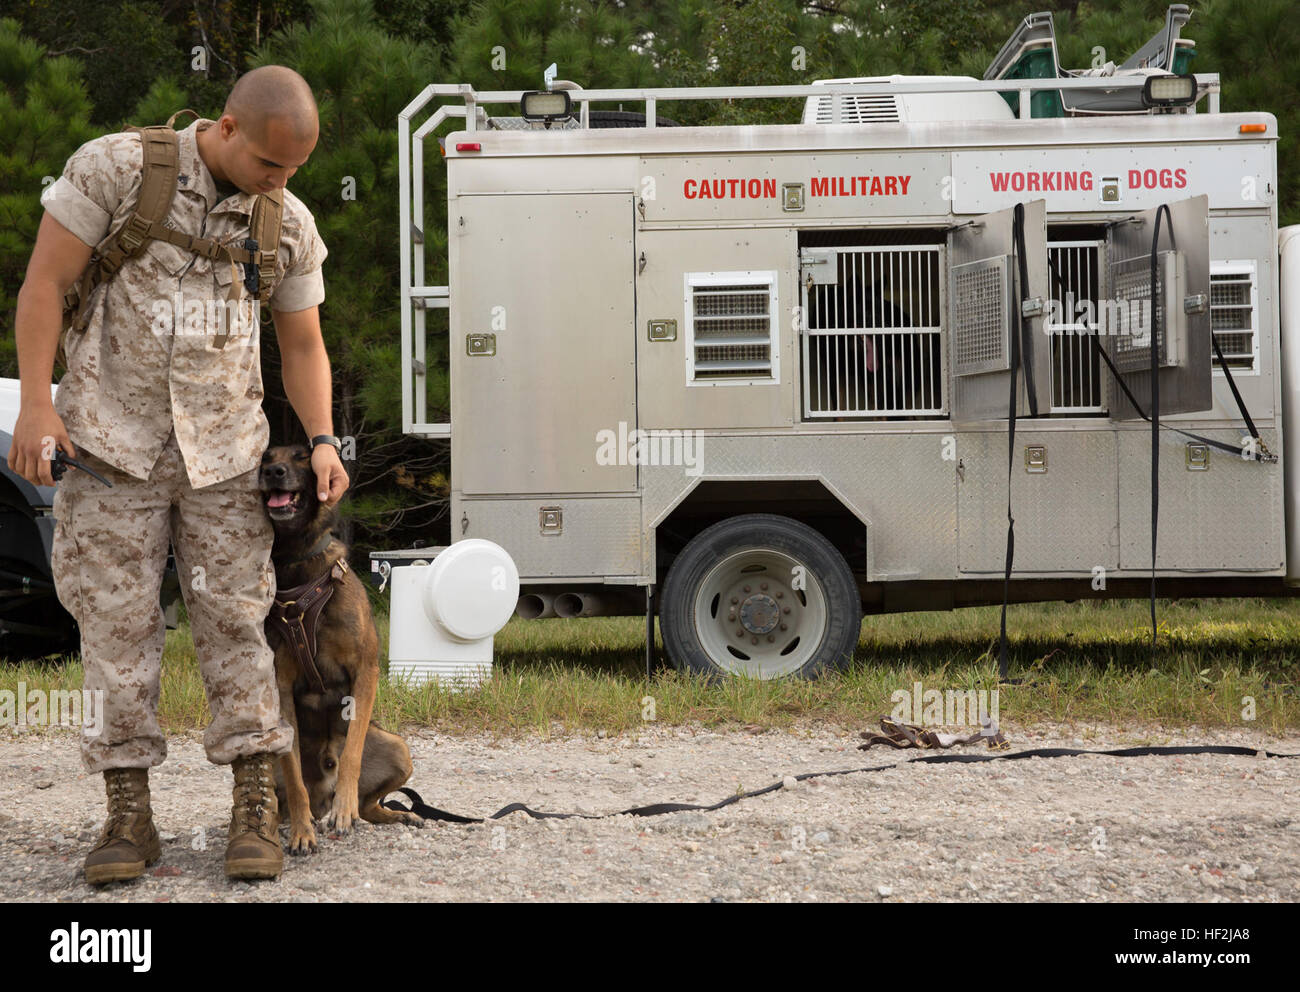 Cpl. Josue Robles, a tracking trainer with Military Working Dog Platoon, 2nd Law Enforcement Battalion, II Marine Expeditionary Force Headquarters Group, and an Elizabeth, N.J., native, pets his dog Lex aboard Marine Corps Base Camp Lejeune, N.C., Oct. 9, 2014. Robles was a part of a seven-man, five-dog team conducting bite, tracker and patrol training, enhancing the canine’s ability to sniff out and listen for targets. (U.S. Marine Corps photo by Lance Cpl. Lucas J. Hopkins/Released) Unleashed, Military Working Dogs, handlers build relationship 141009-M-TR086-221 Stock Photo